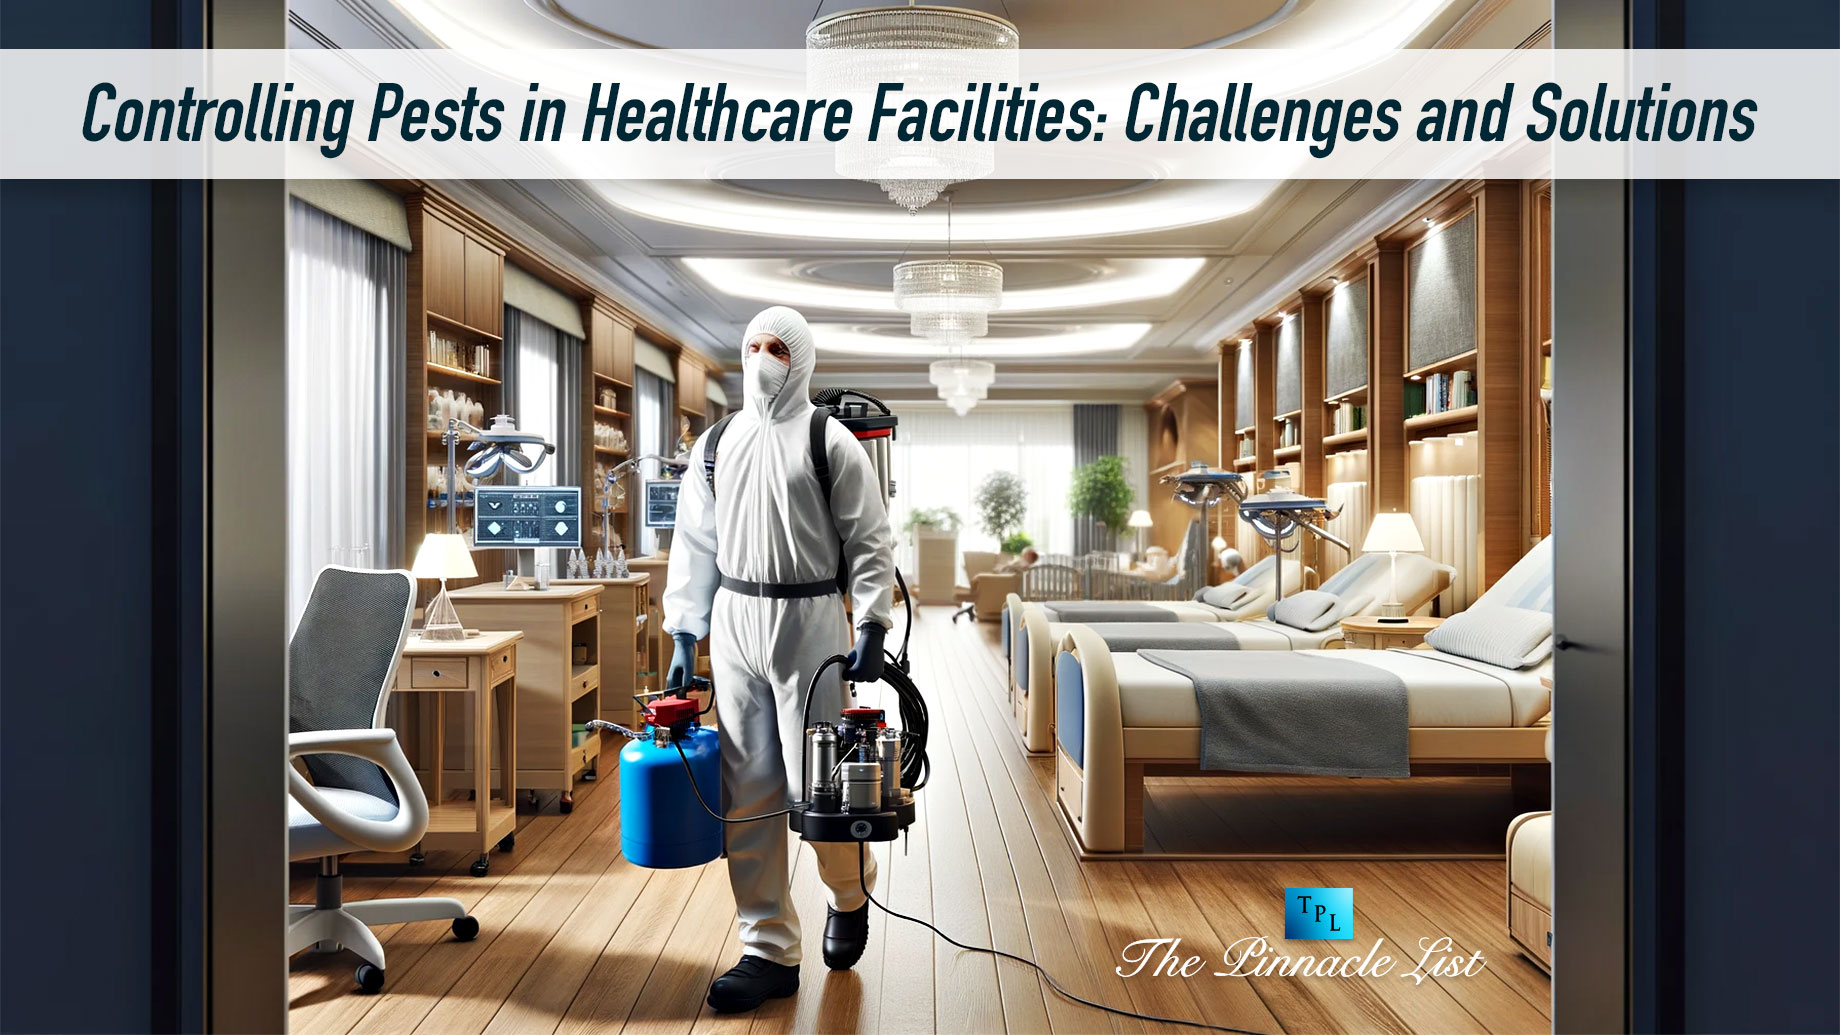 Controlling Pests in Healthcare Facilities: Challenges and Solutions